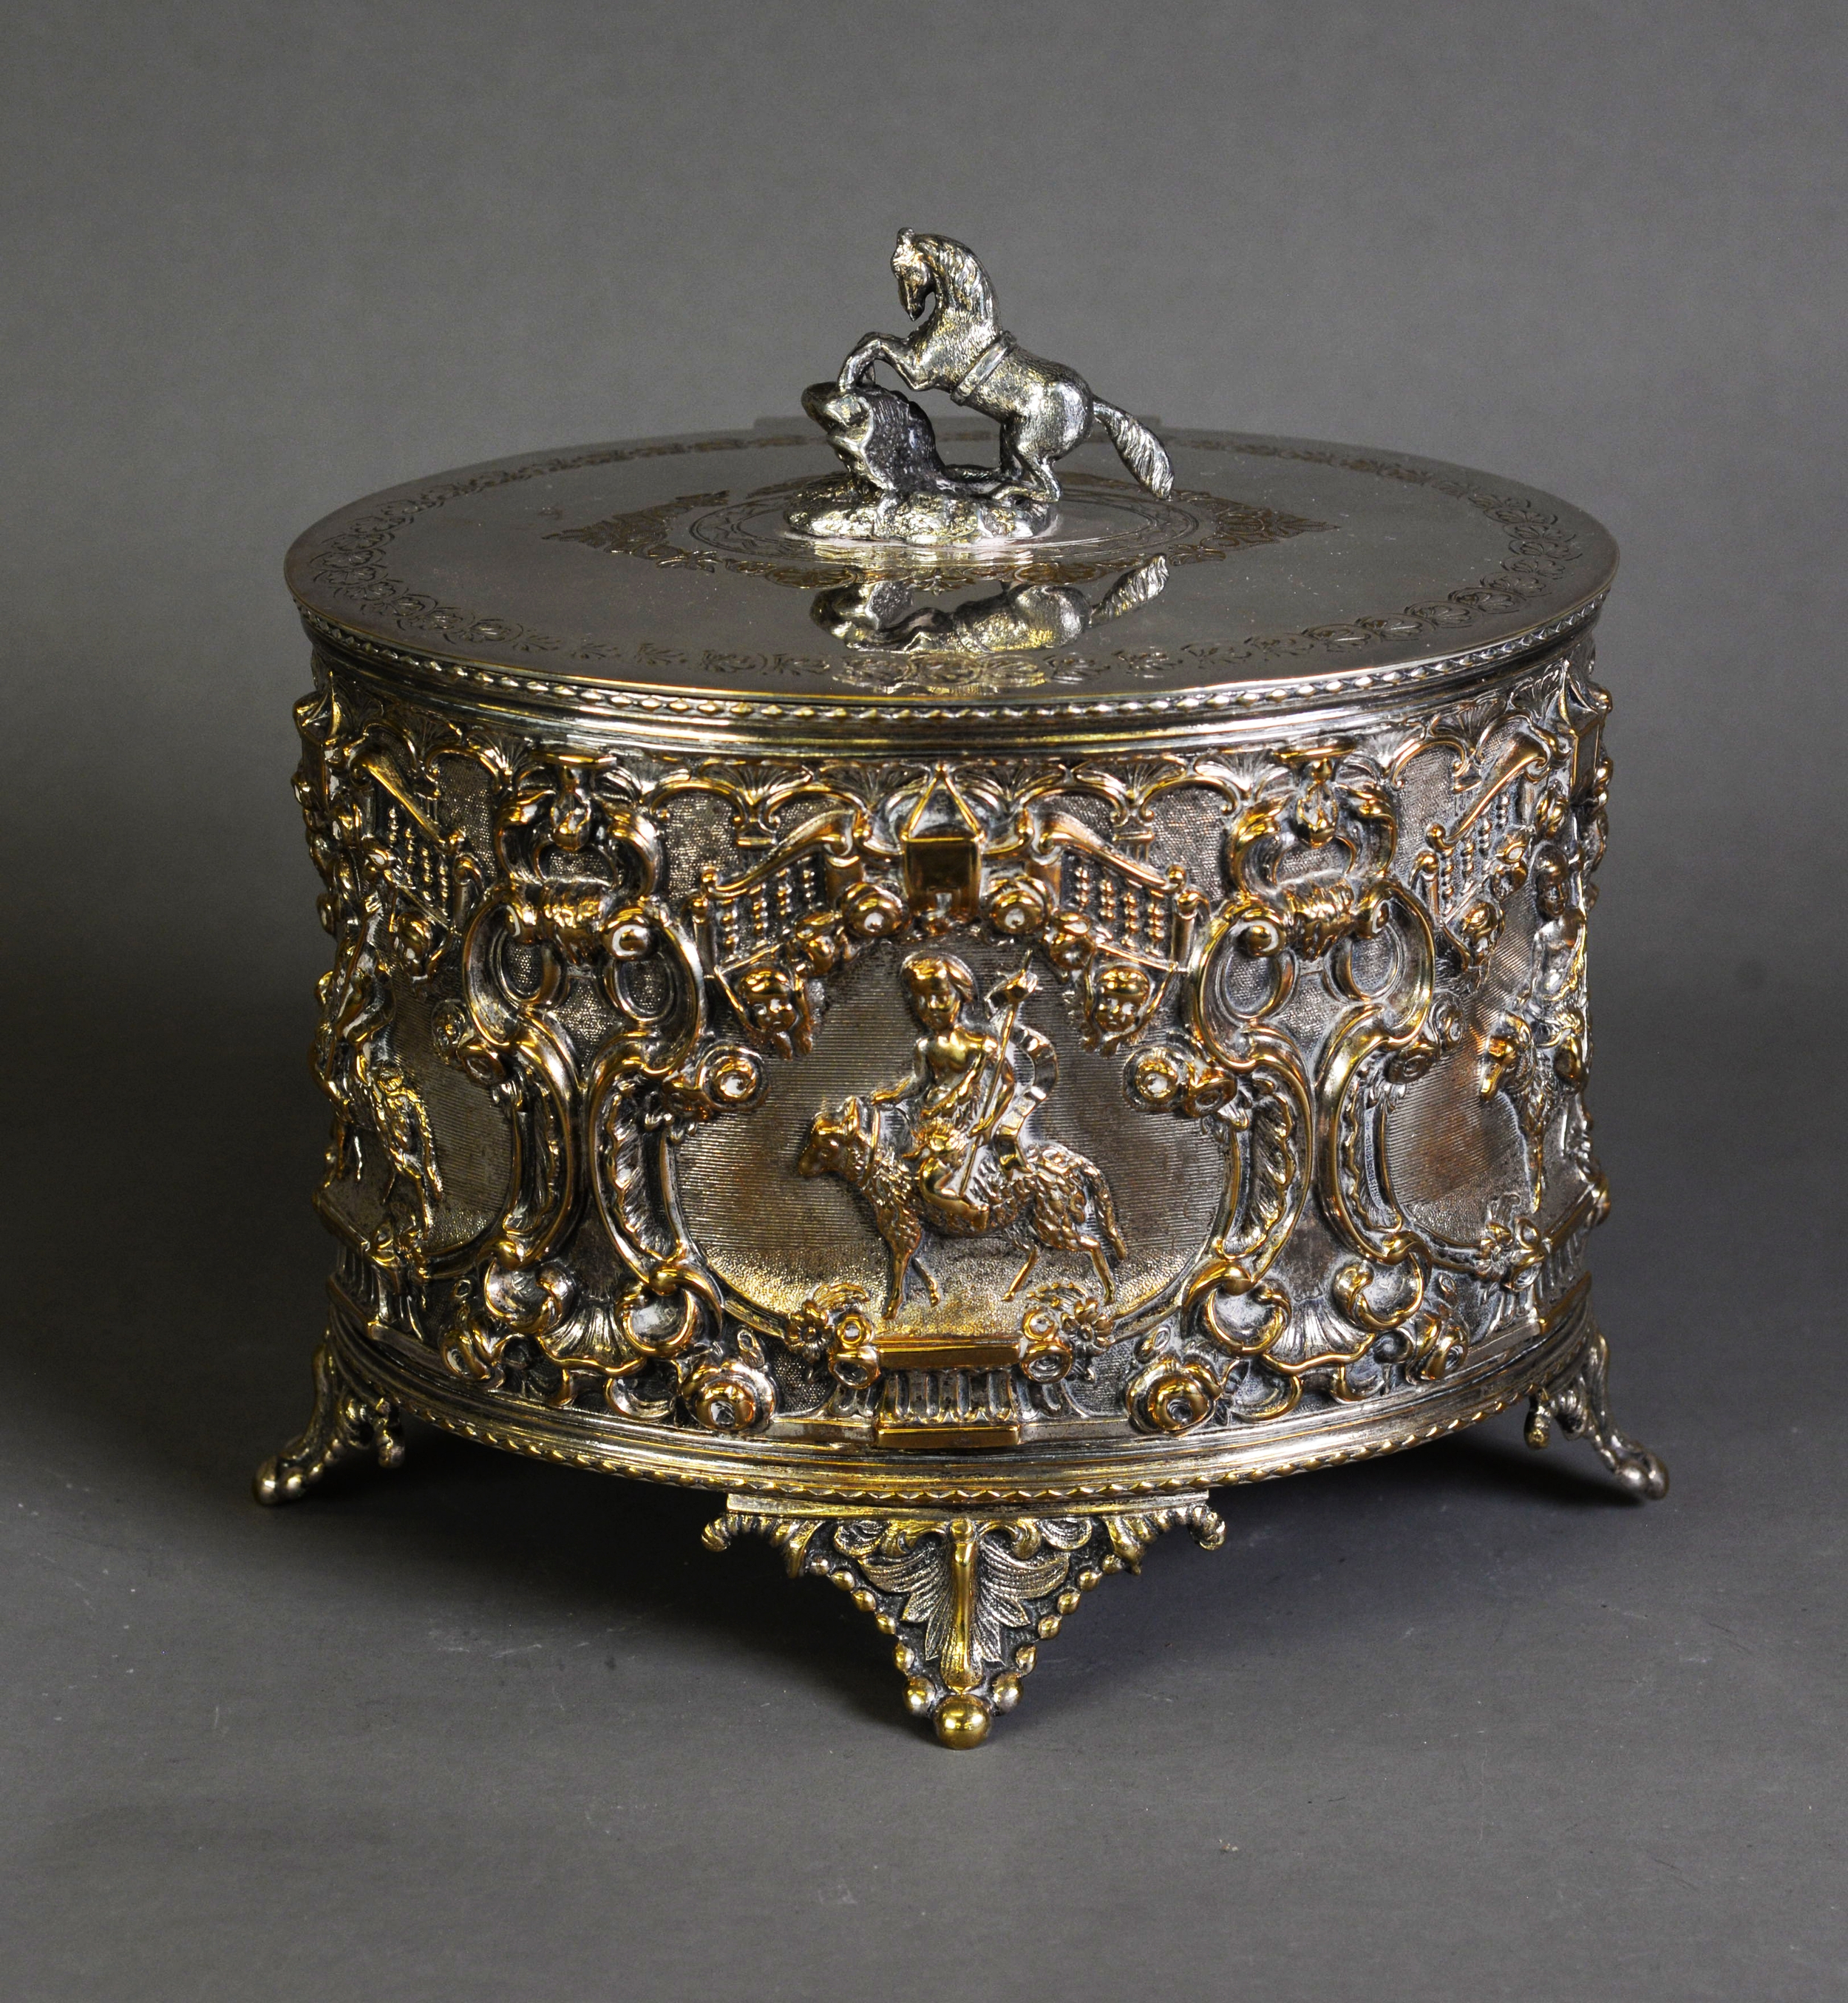 IMPRESSIVE VICTORIAN ELECTROPLATED BISCUIT BARREL, of oval form with acanthus capped feet and